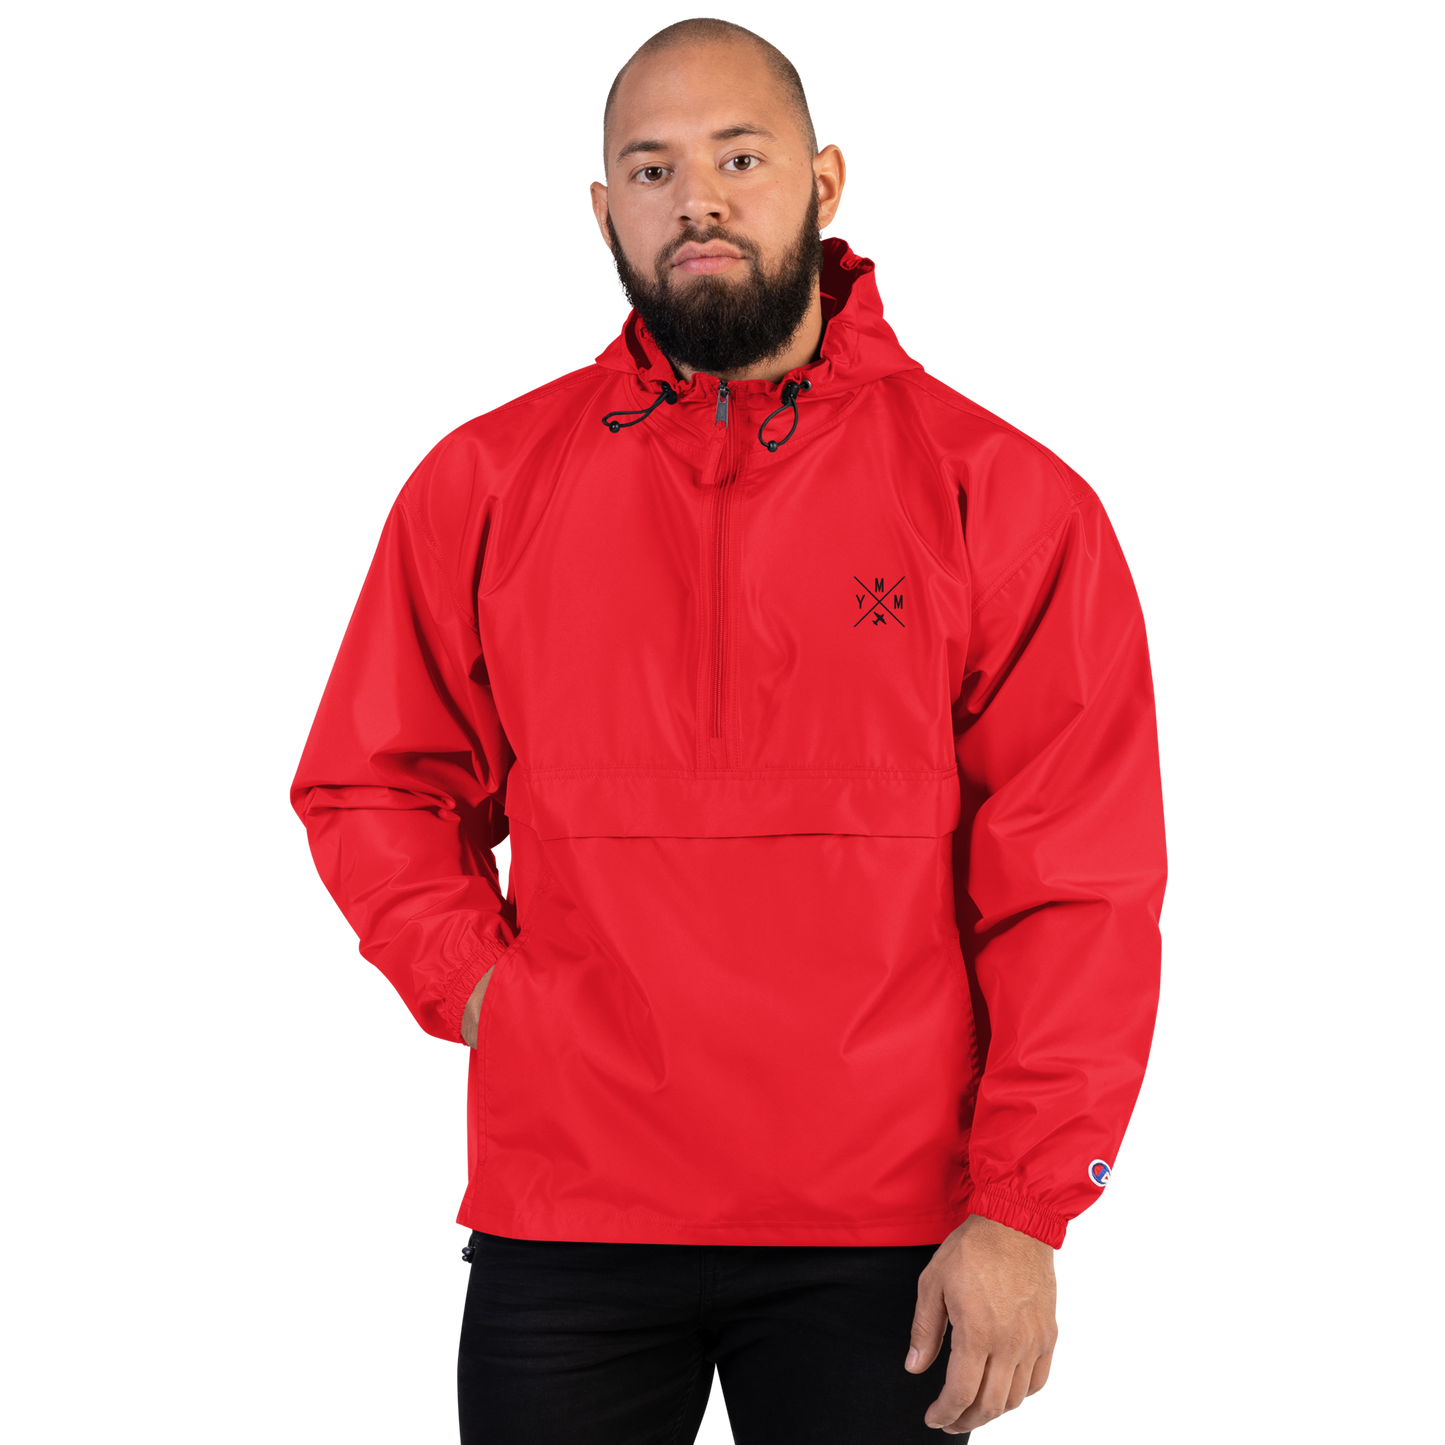 Crossed-X Packable Jacket • YMM Fort McMurray • YHM Designs - Image 11